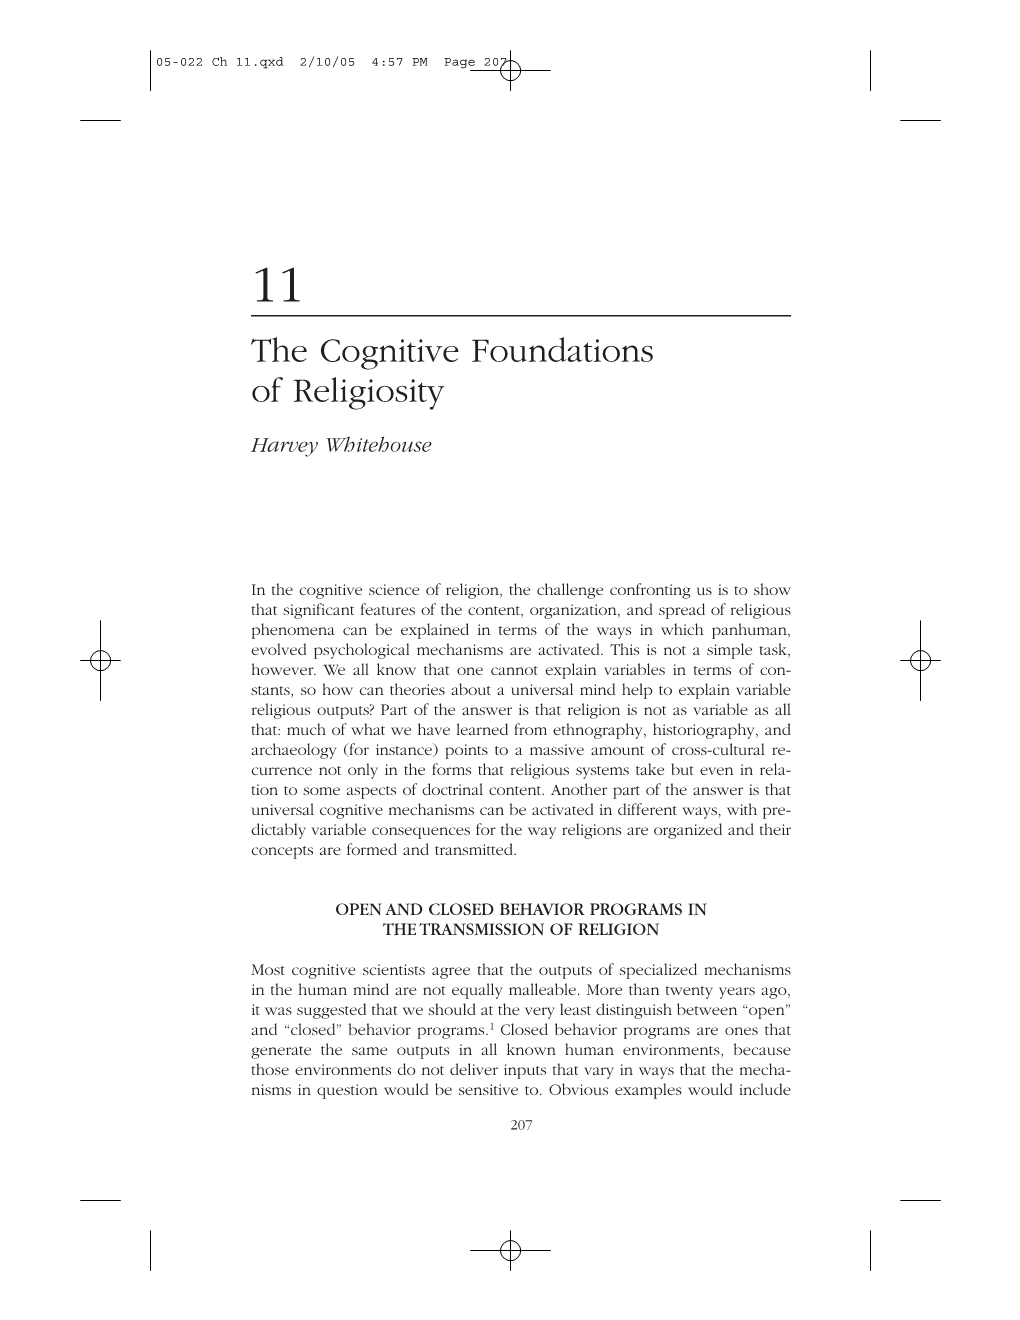 The Cognitive Foundations of Religiosity